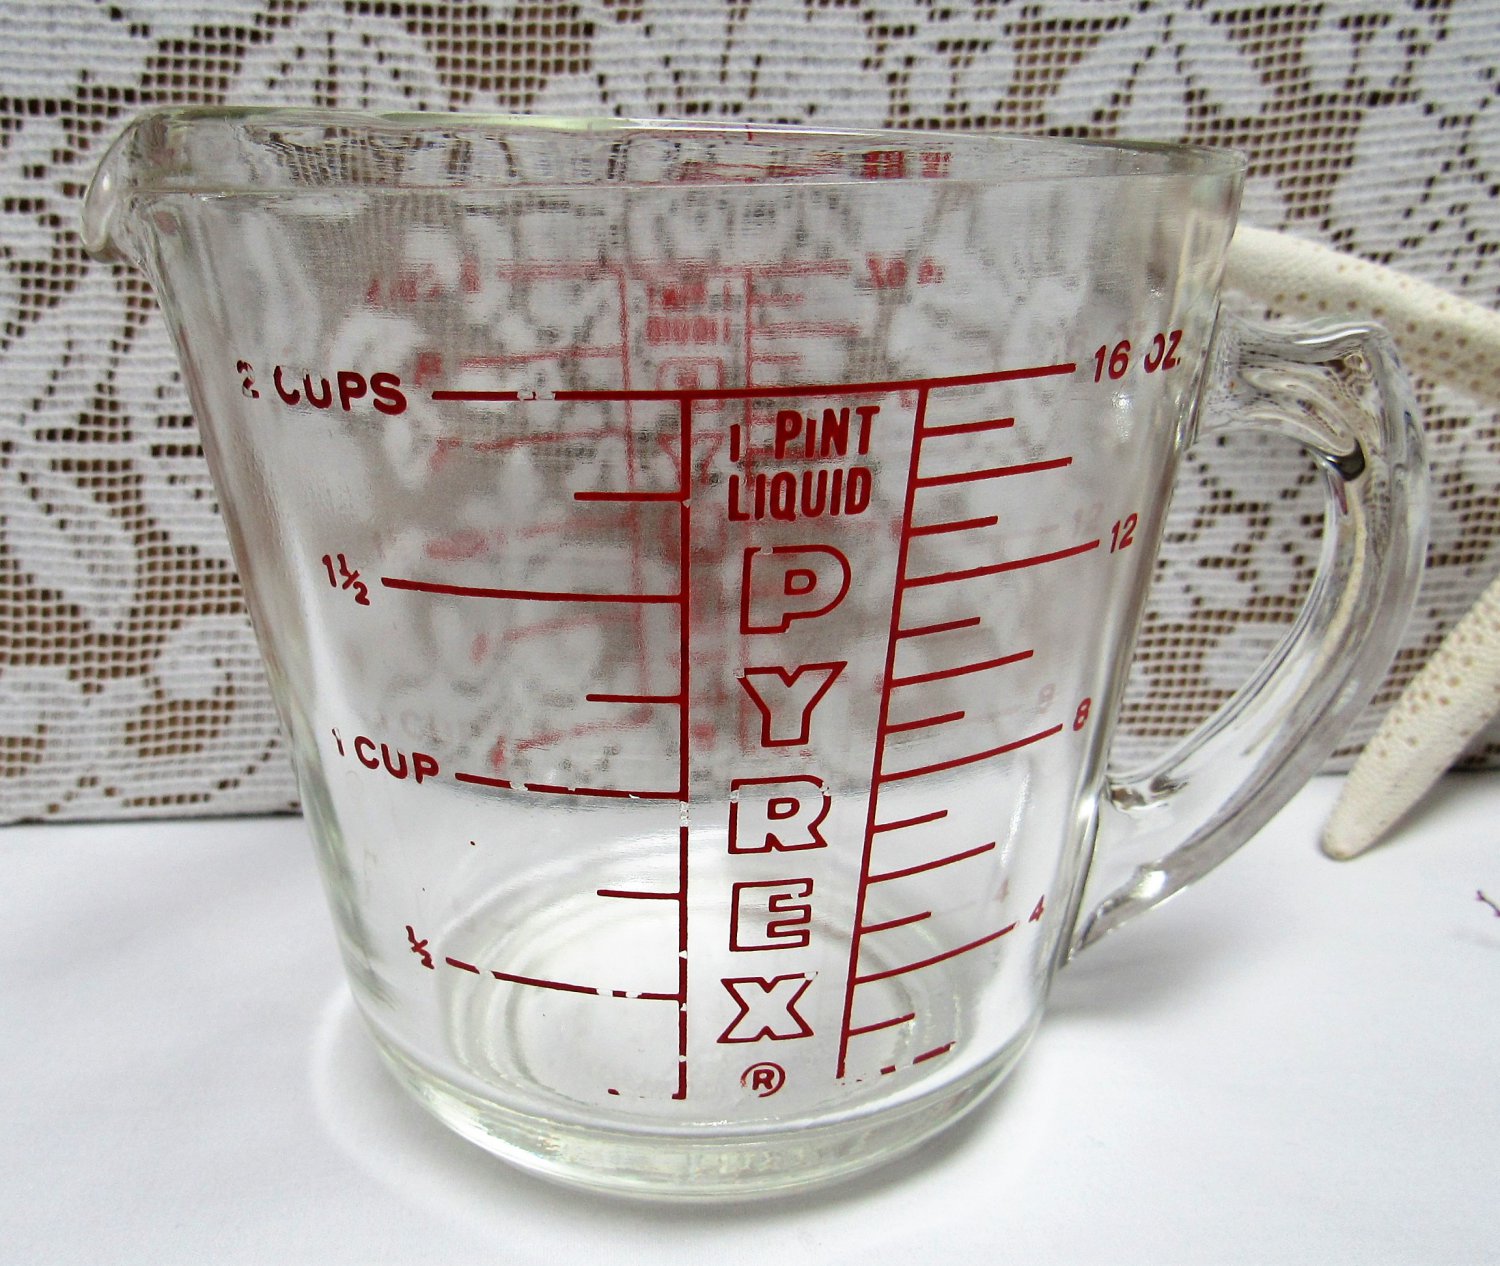 Vintage PYREX Glass Measuring Cup - 4 Cups/1QT With Red Lettering